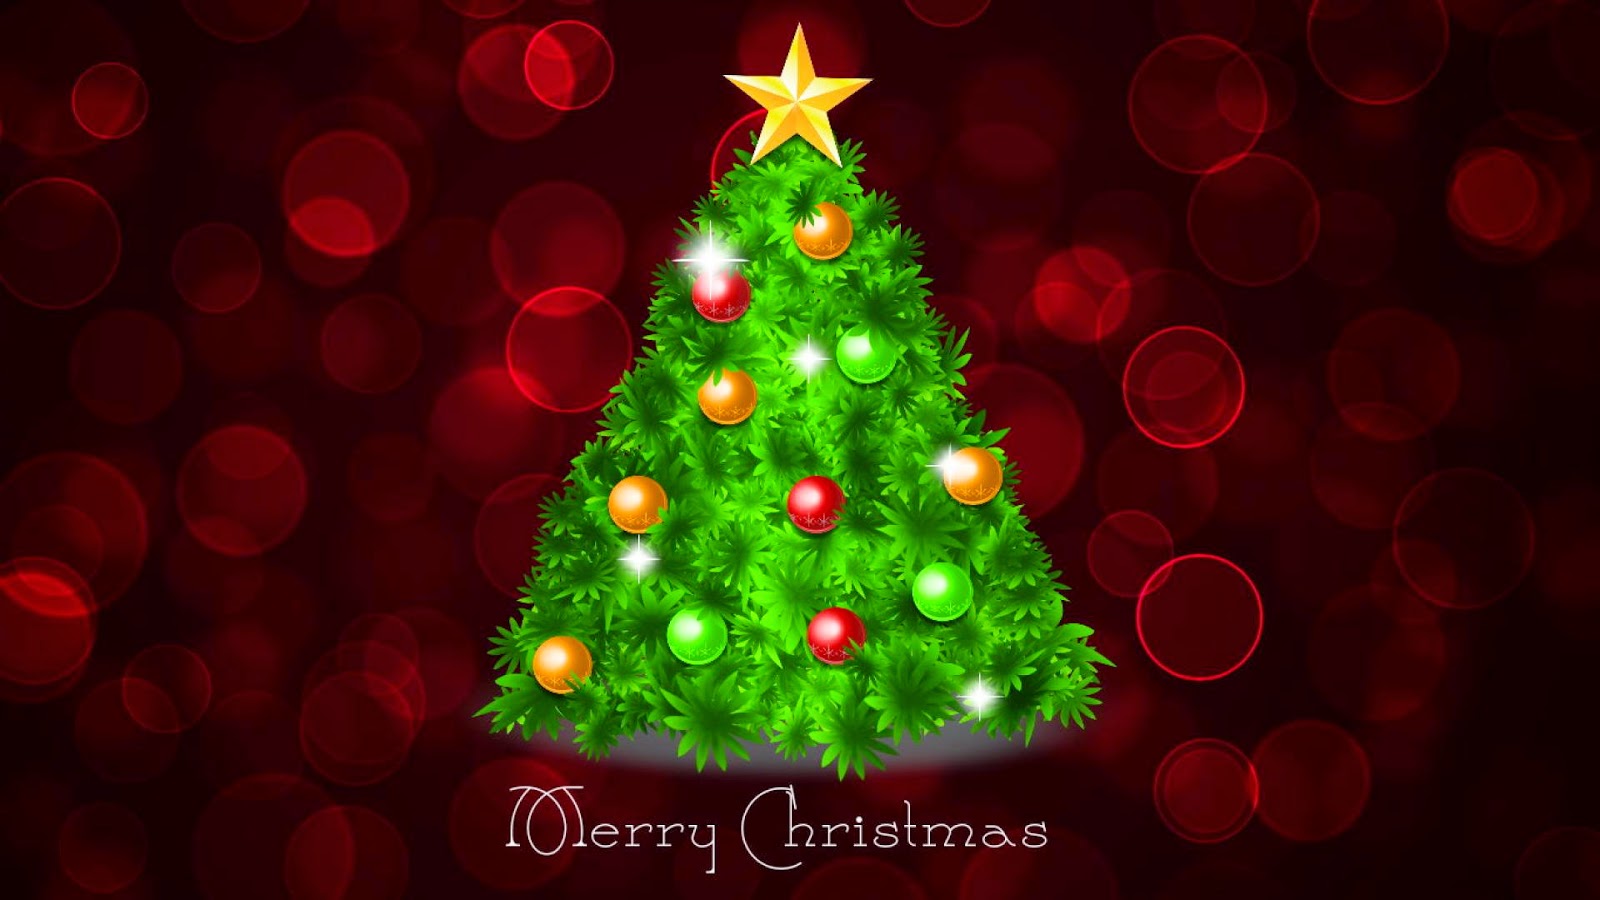 Christmas tree abstract design images | PIXHOME